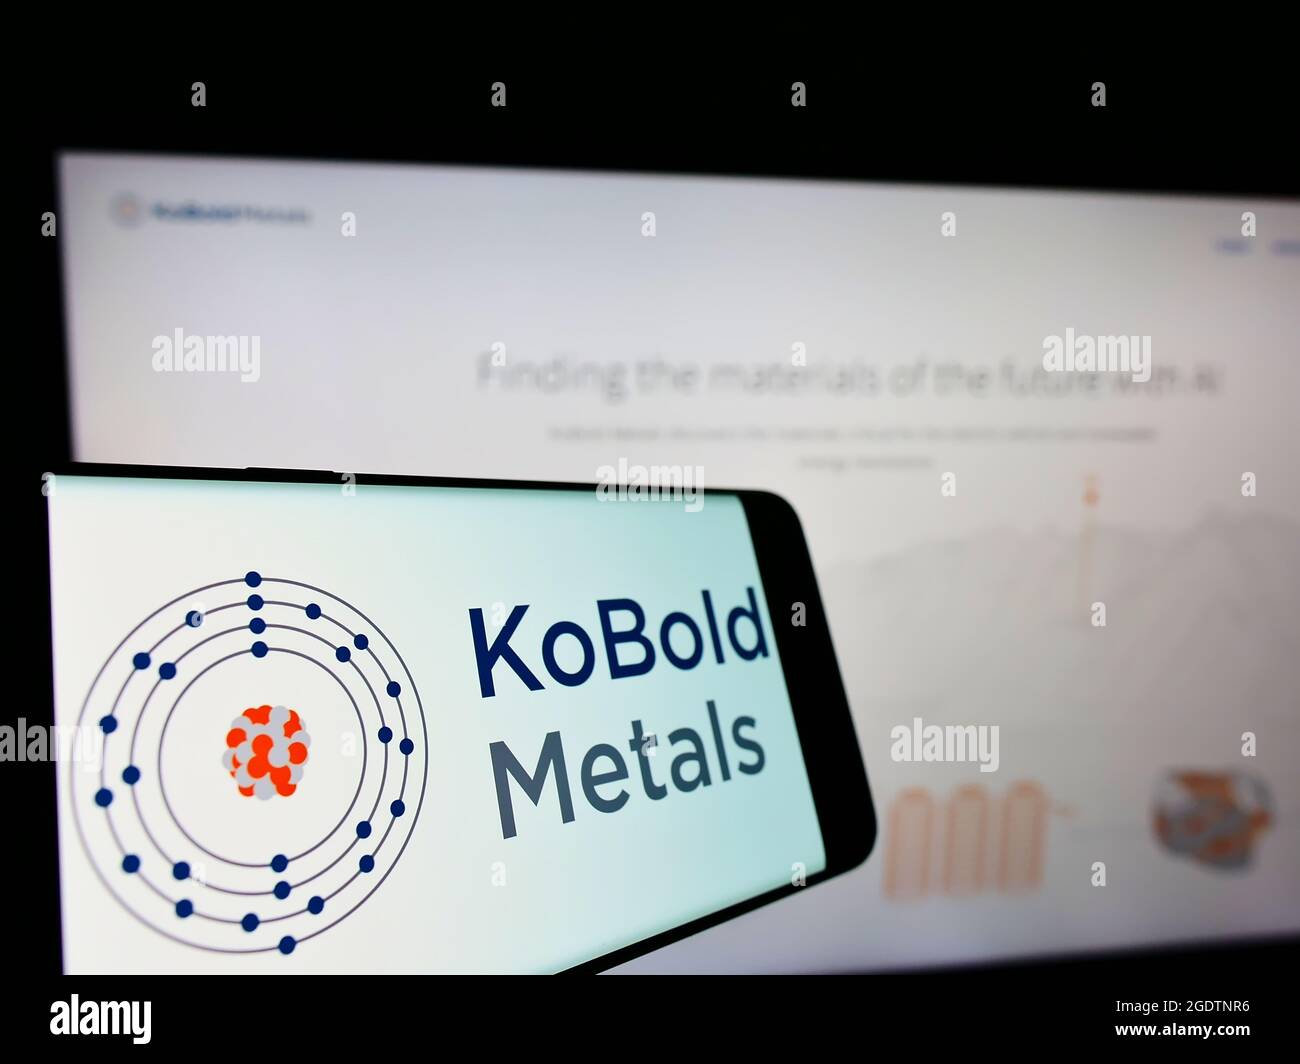 Smartphone with logo of US mining technology company KoBold Metals on screen in front of business website. Focus on center-left of phone display. Stock Photo